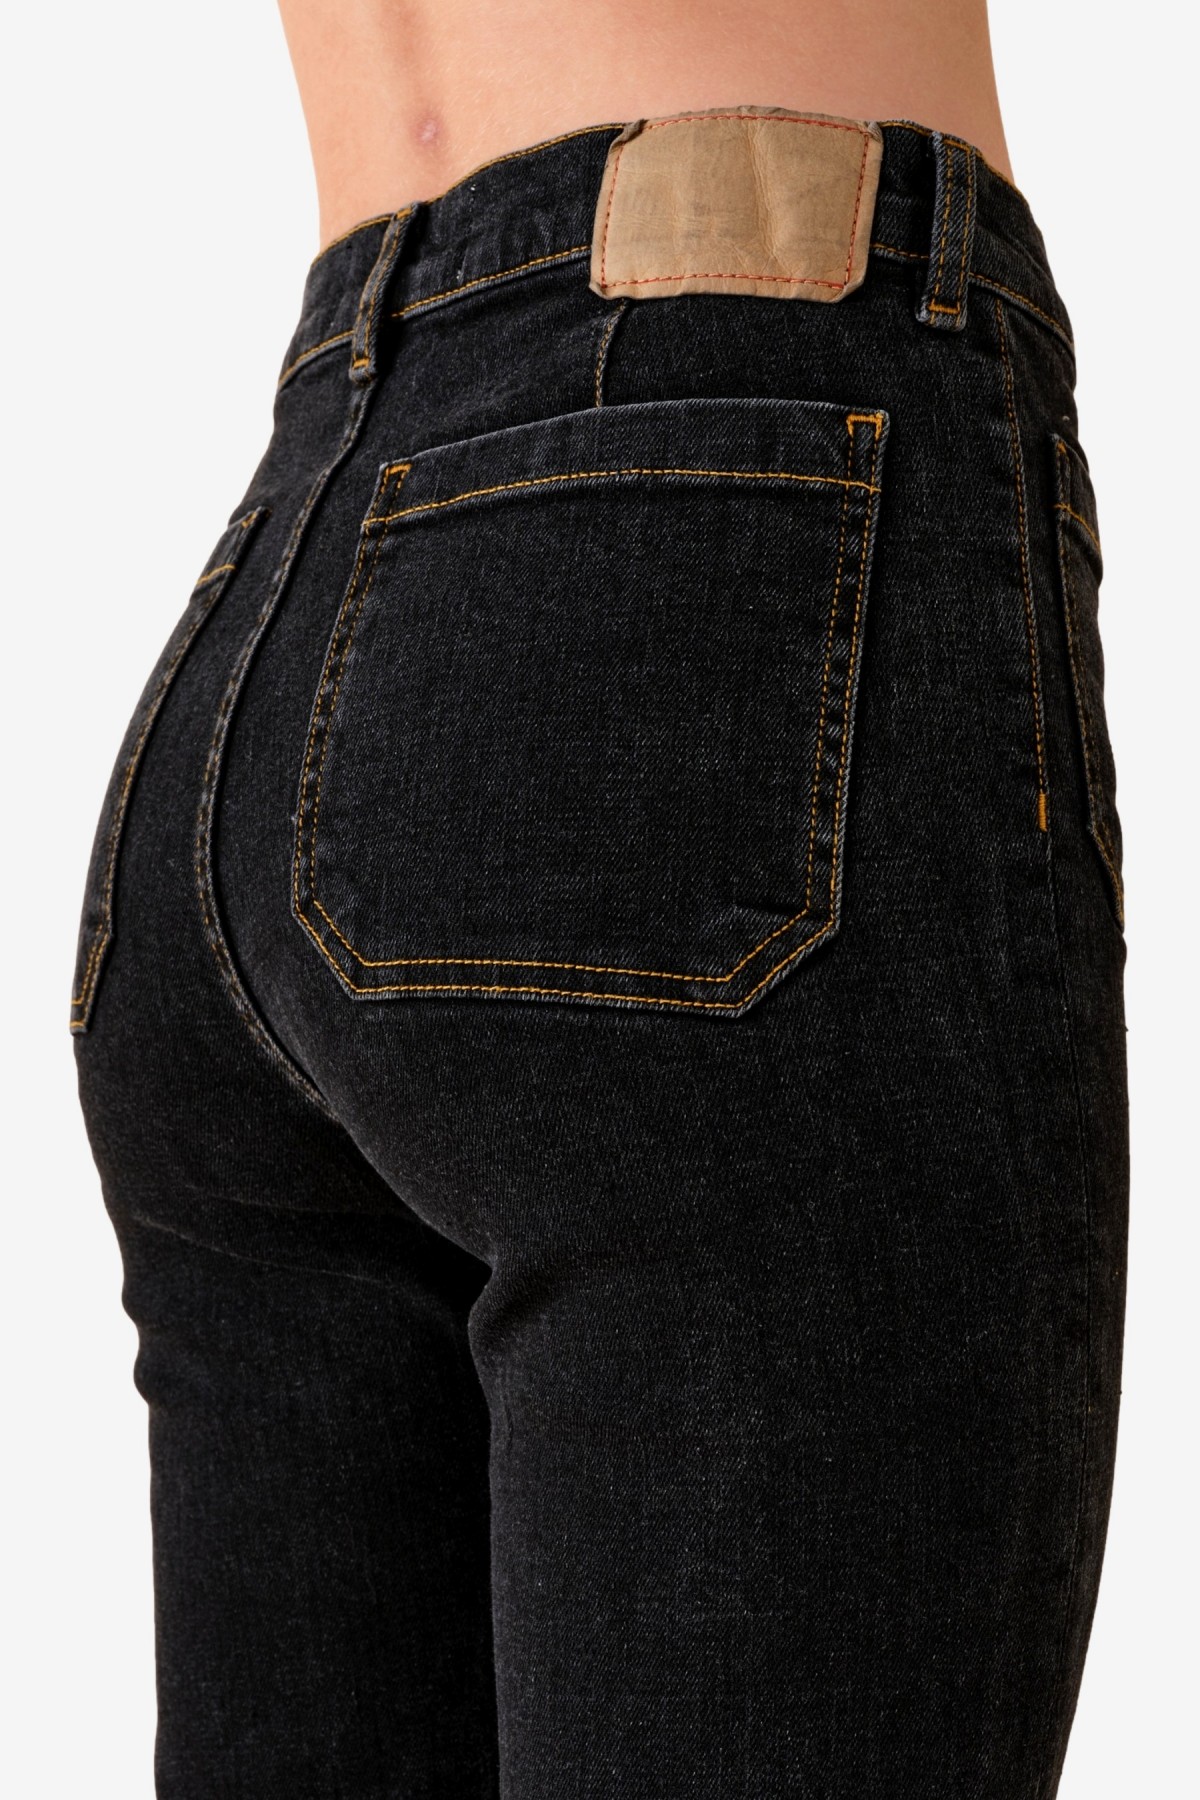 Jeanerica AW014 Alta Jeans in Black 8 Weeks